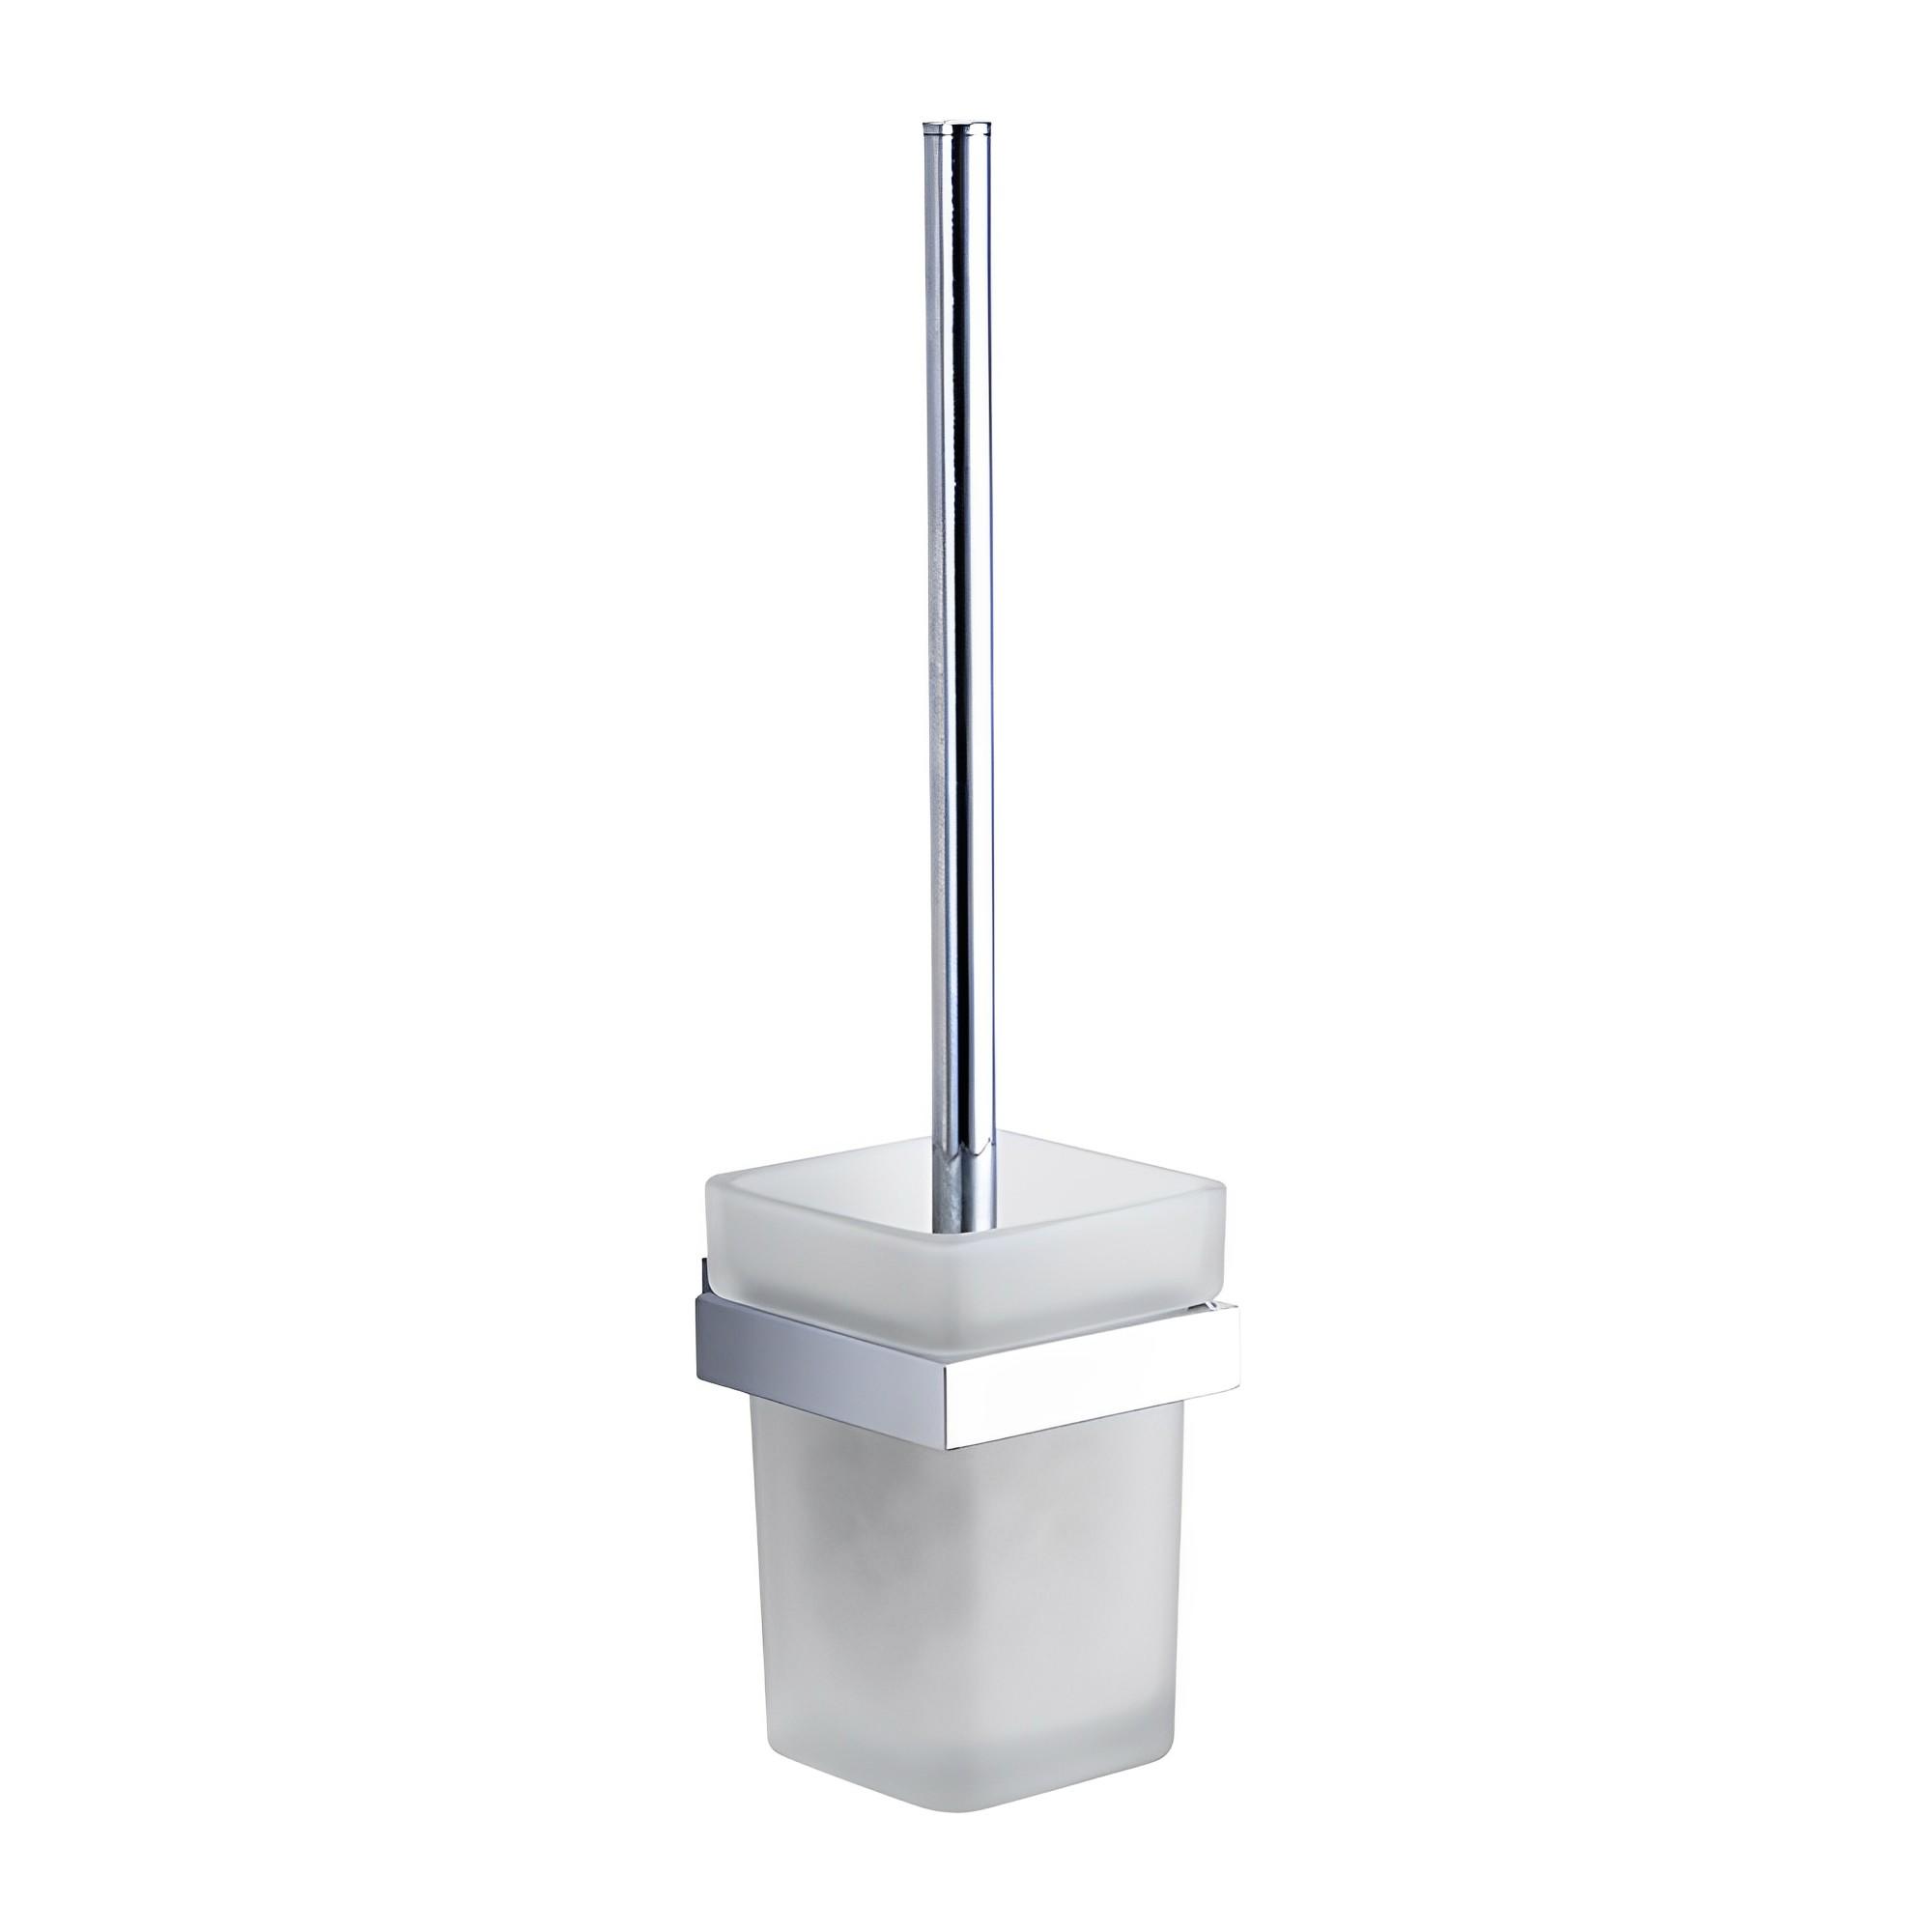 OJ-G1419L Brass Toilet Brush Holder Chrome Plated Handle with Frosted Glass Cups Brass Bathroom Accessories